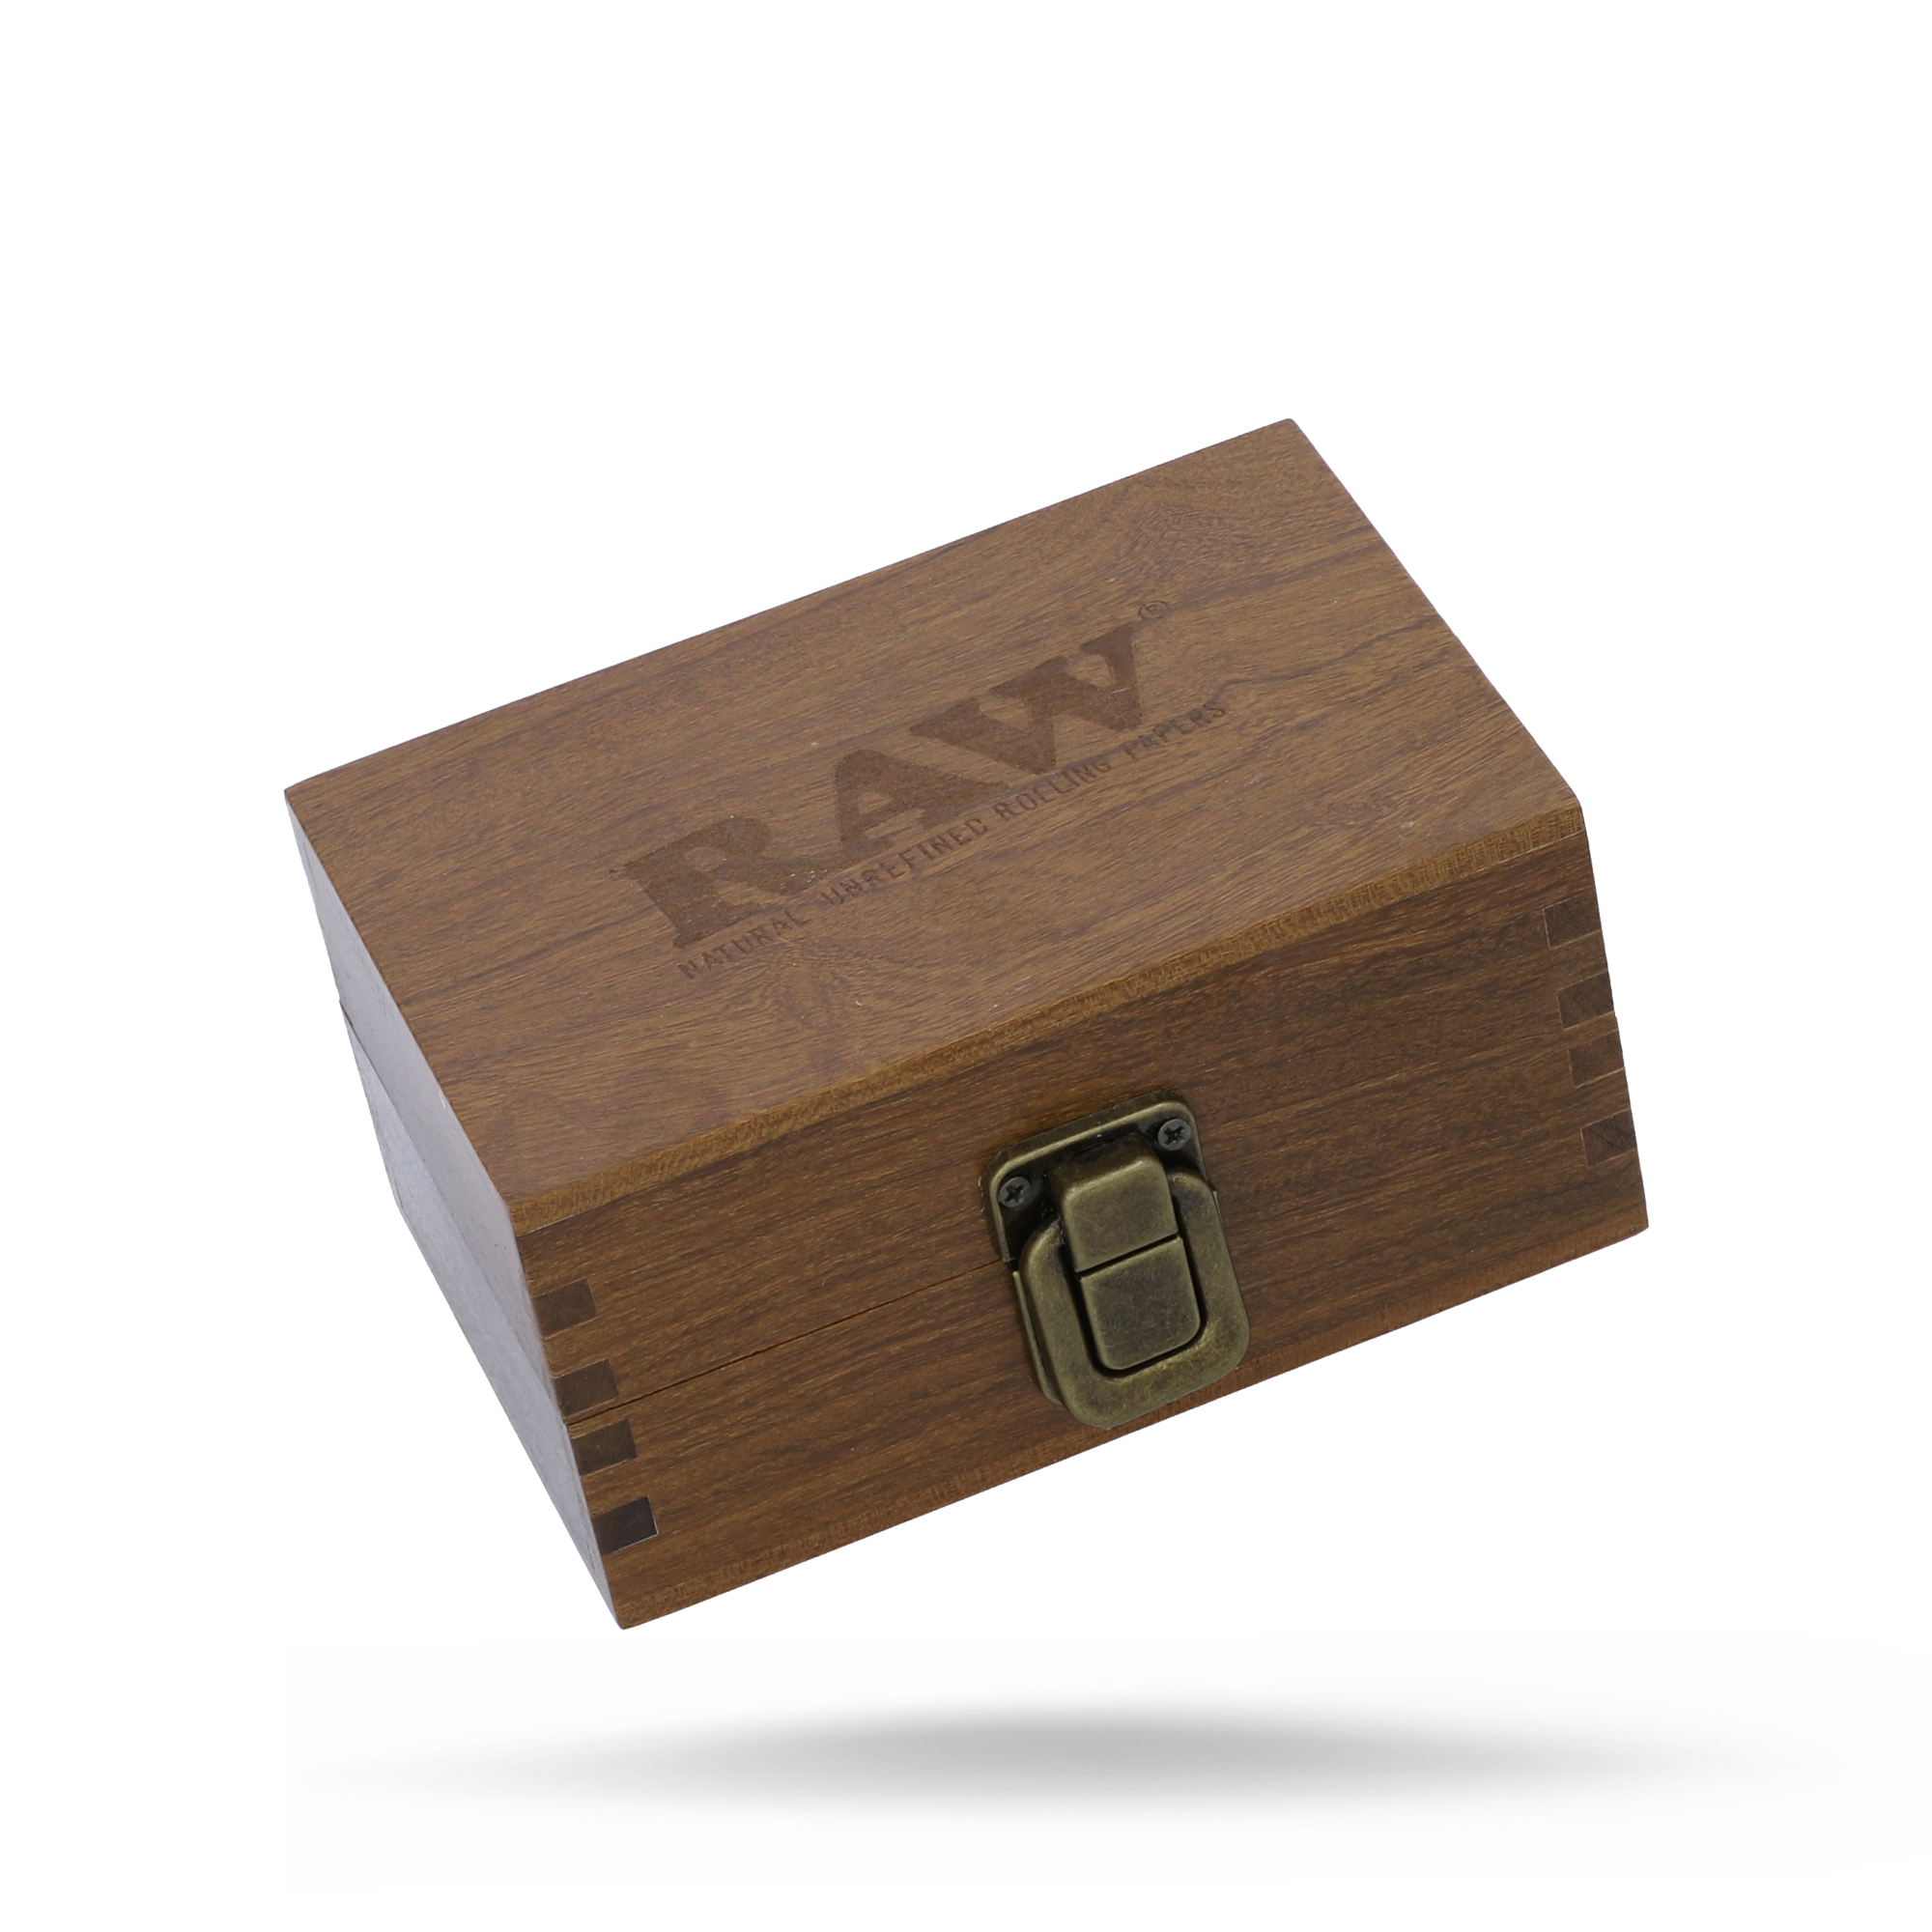 RAW Classic Wood Box Storage WAR00210-MUSA01 esd-official